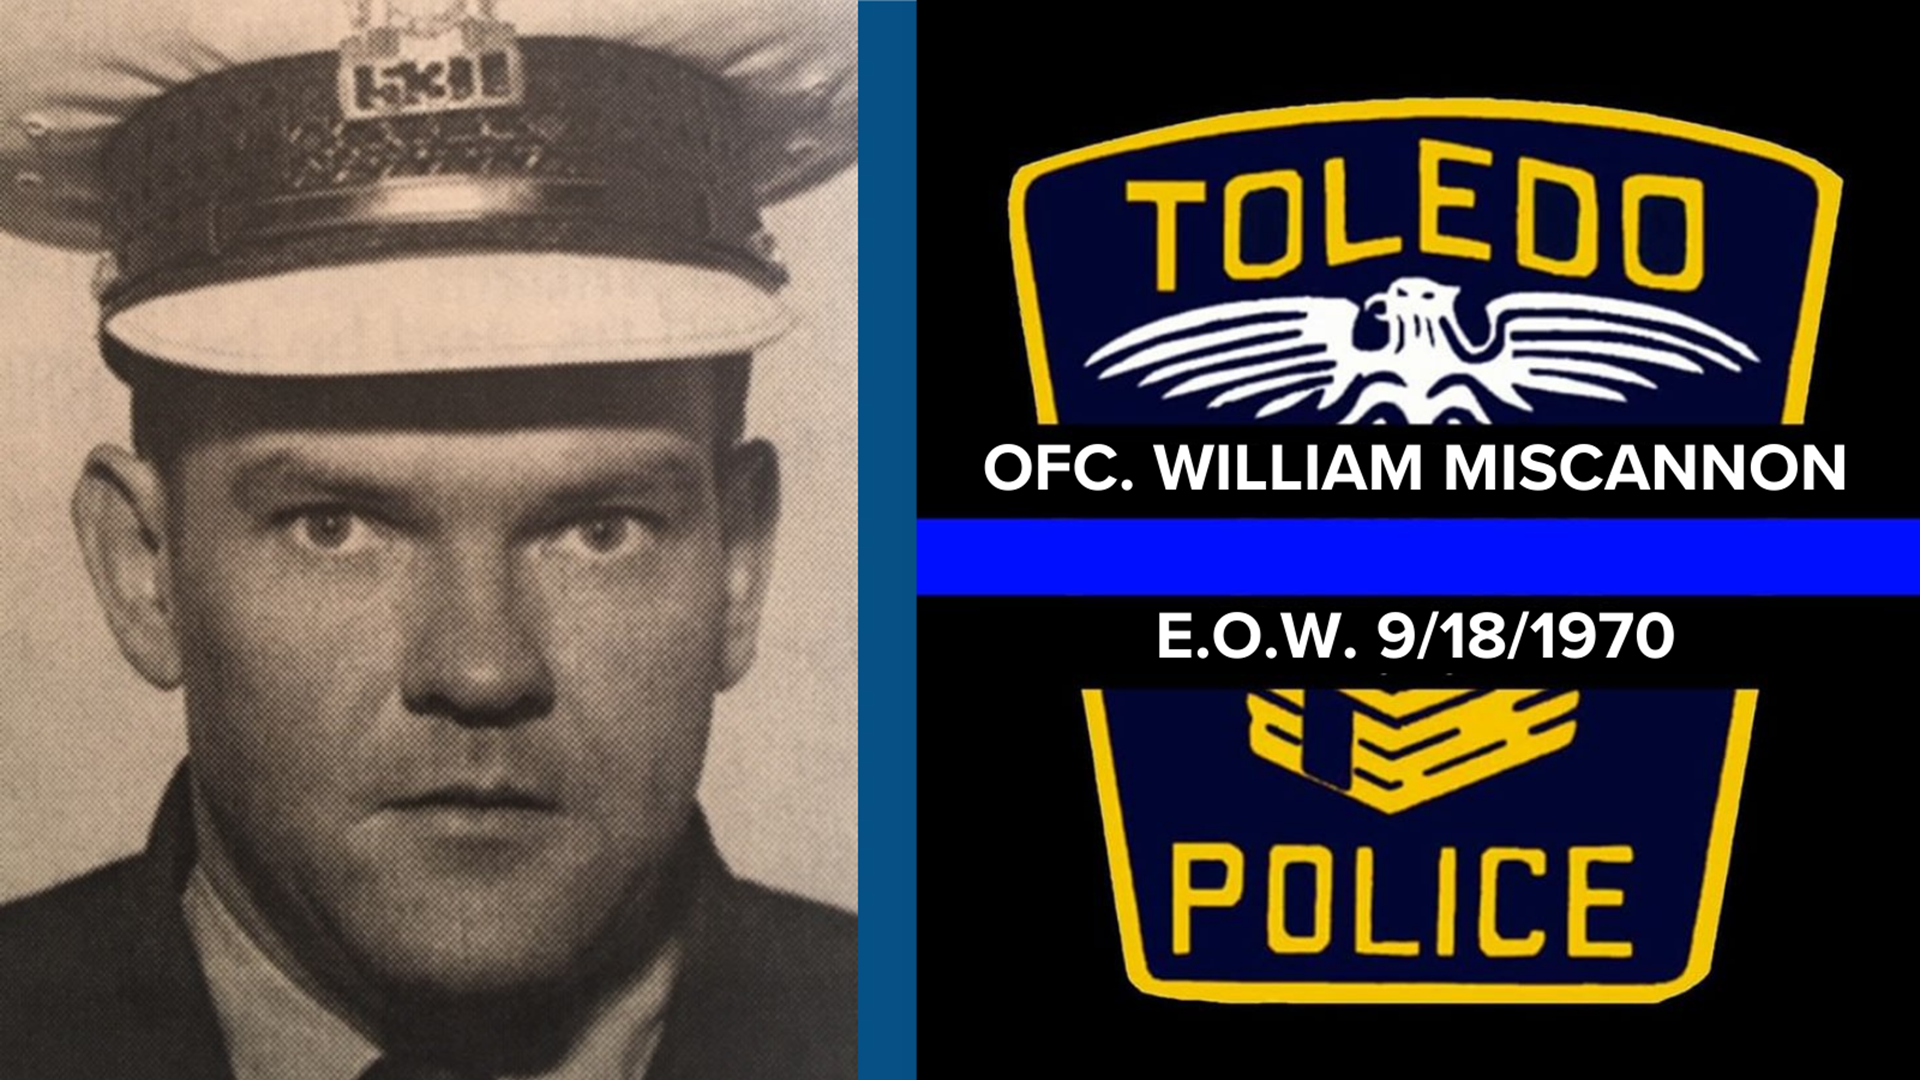 Officer William Miscannon was slain while on patrol in Toledo Sept. 18, 1970.